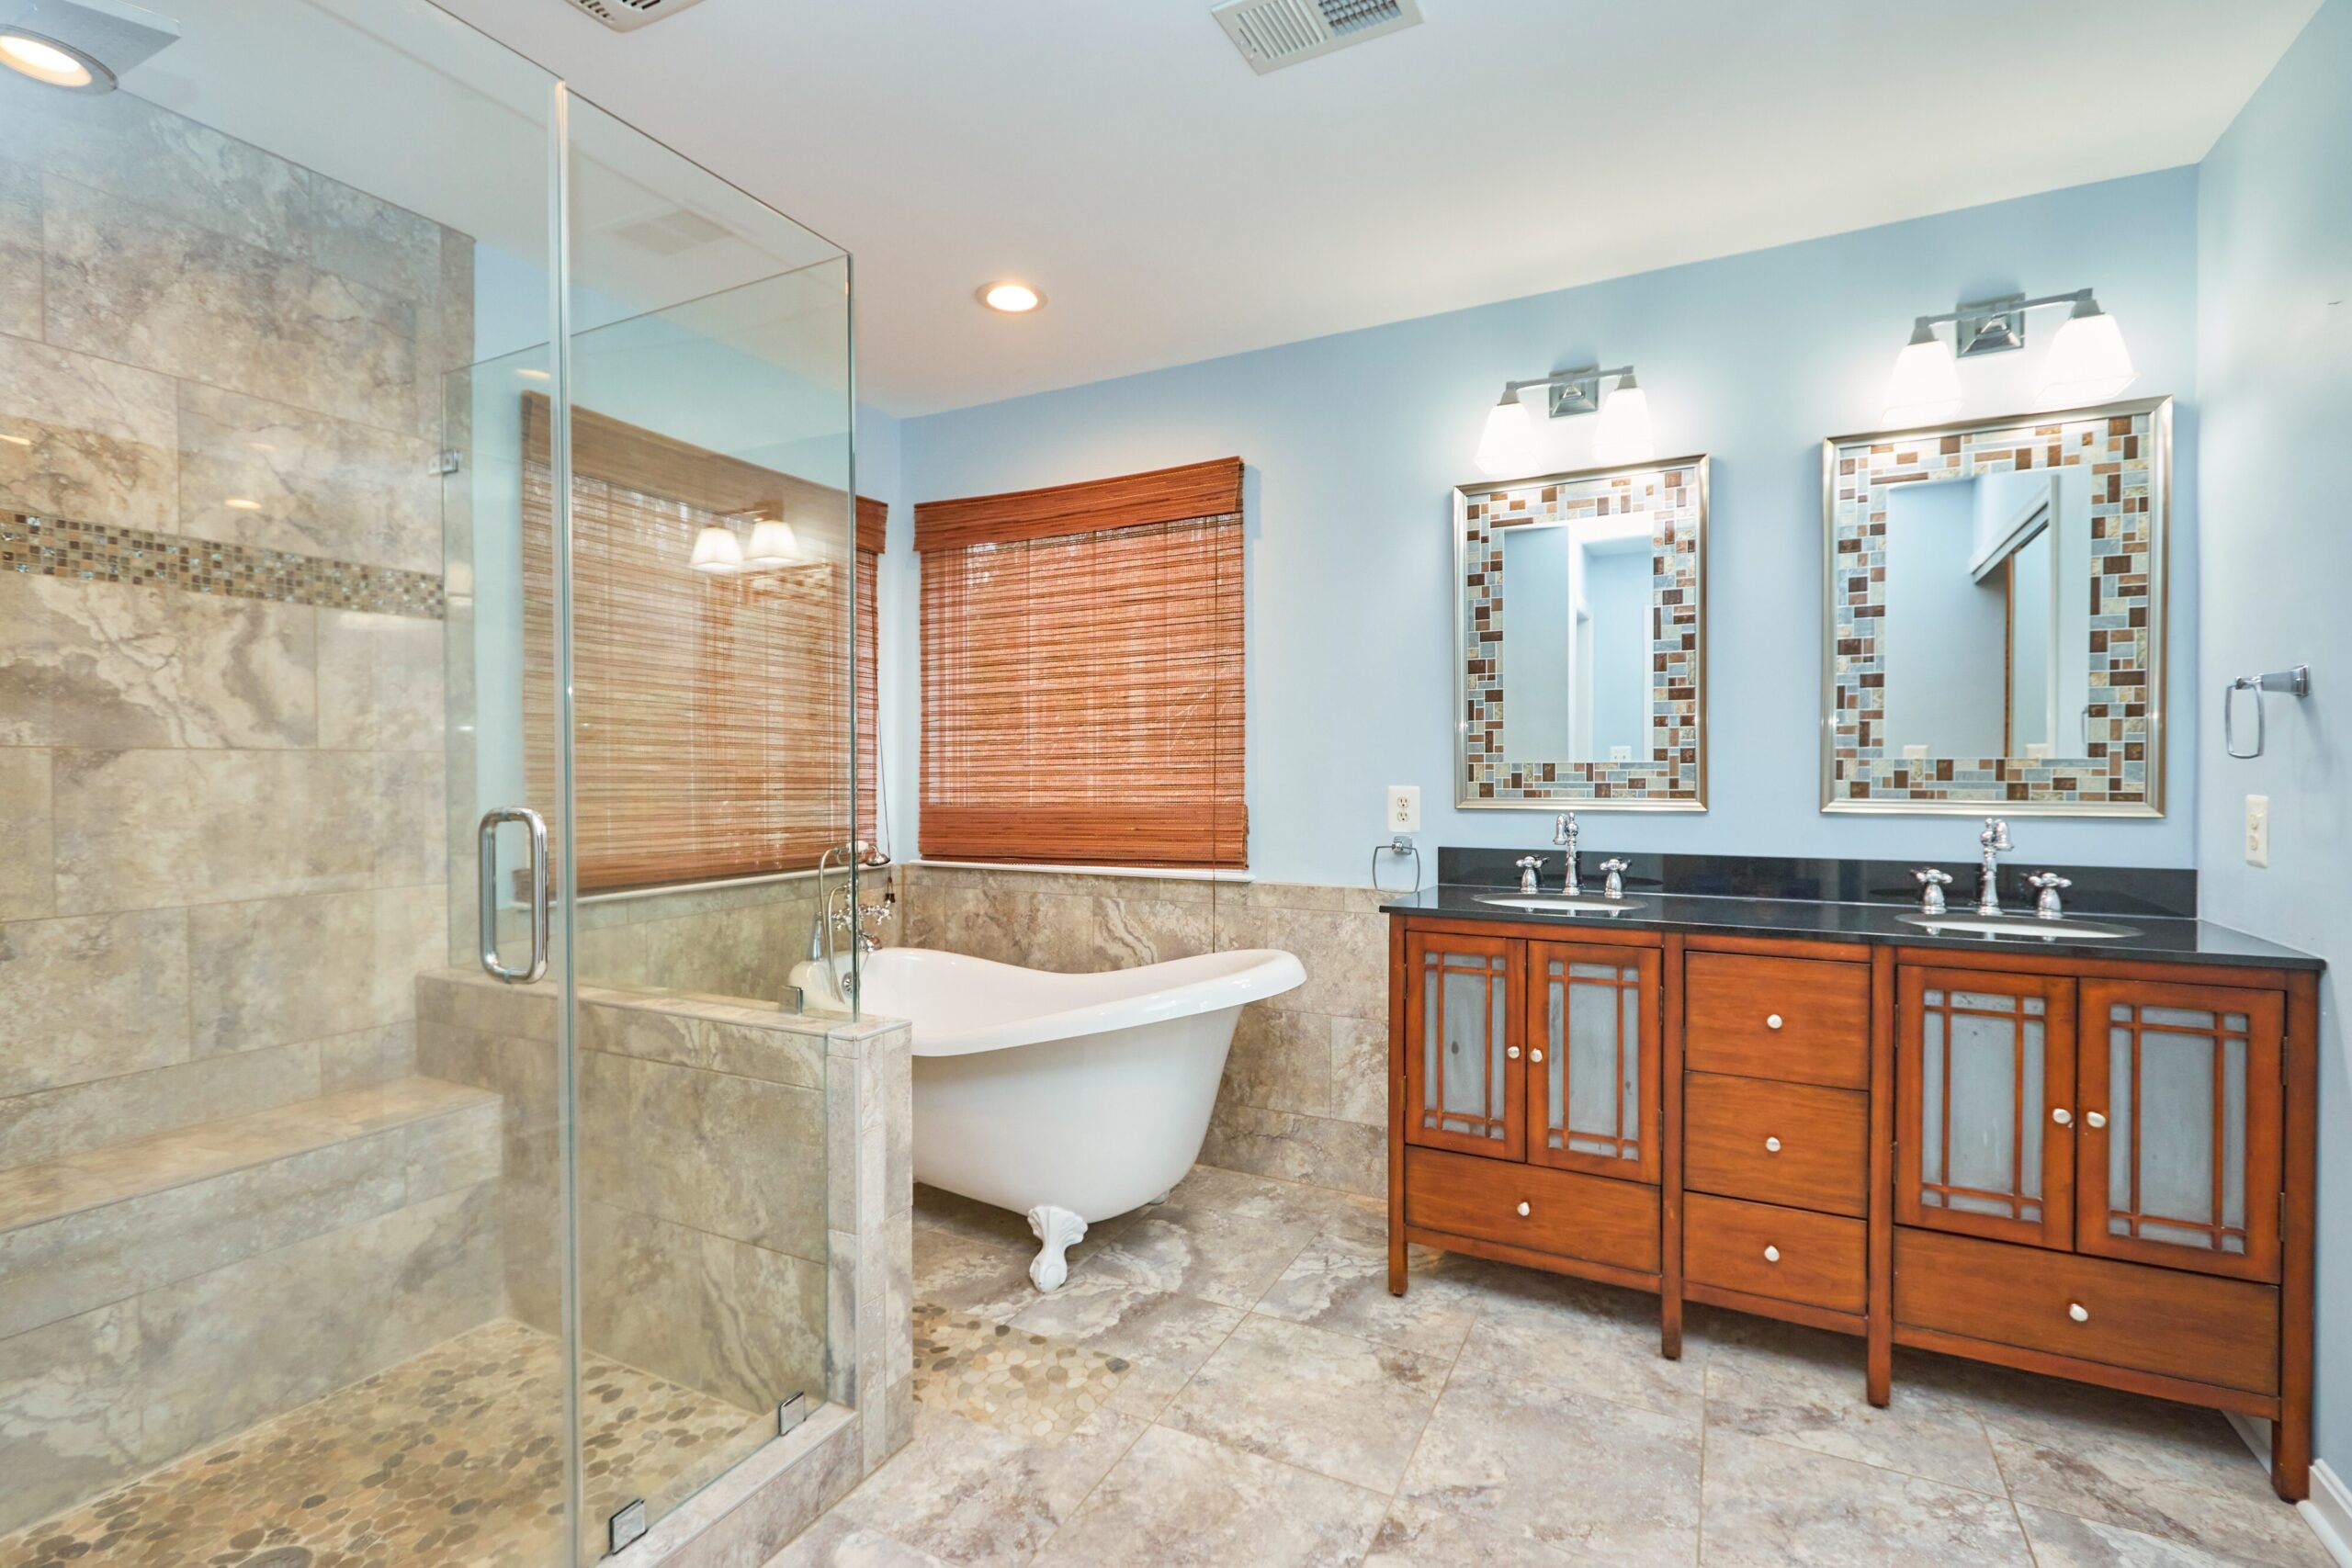 Professional interior photo of 80 Brentsmill Drive in Stafford, Virginia - showing the master bathroom with large stone shower and white claw bathtub